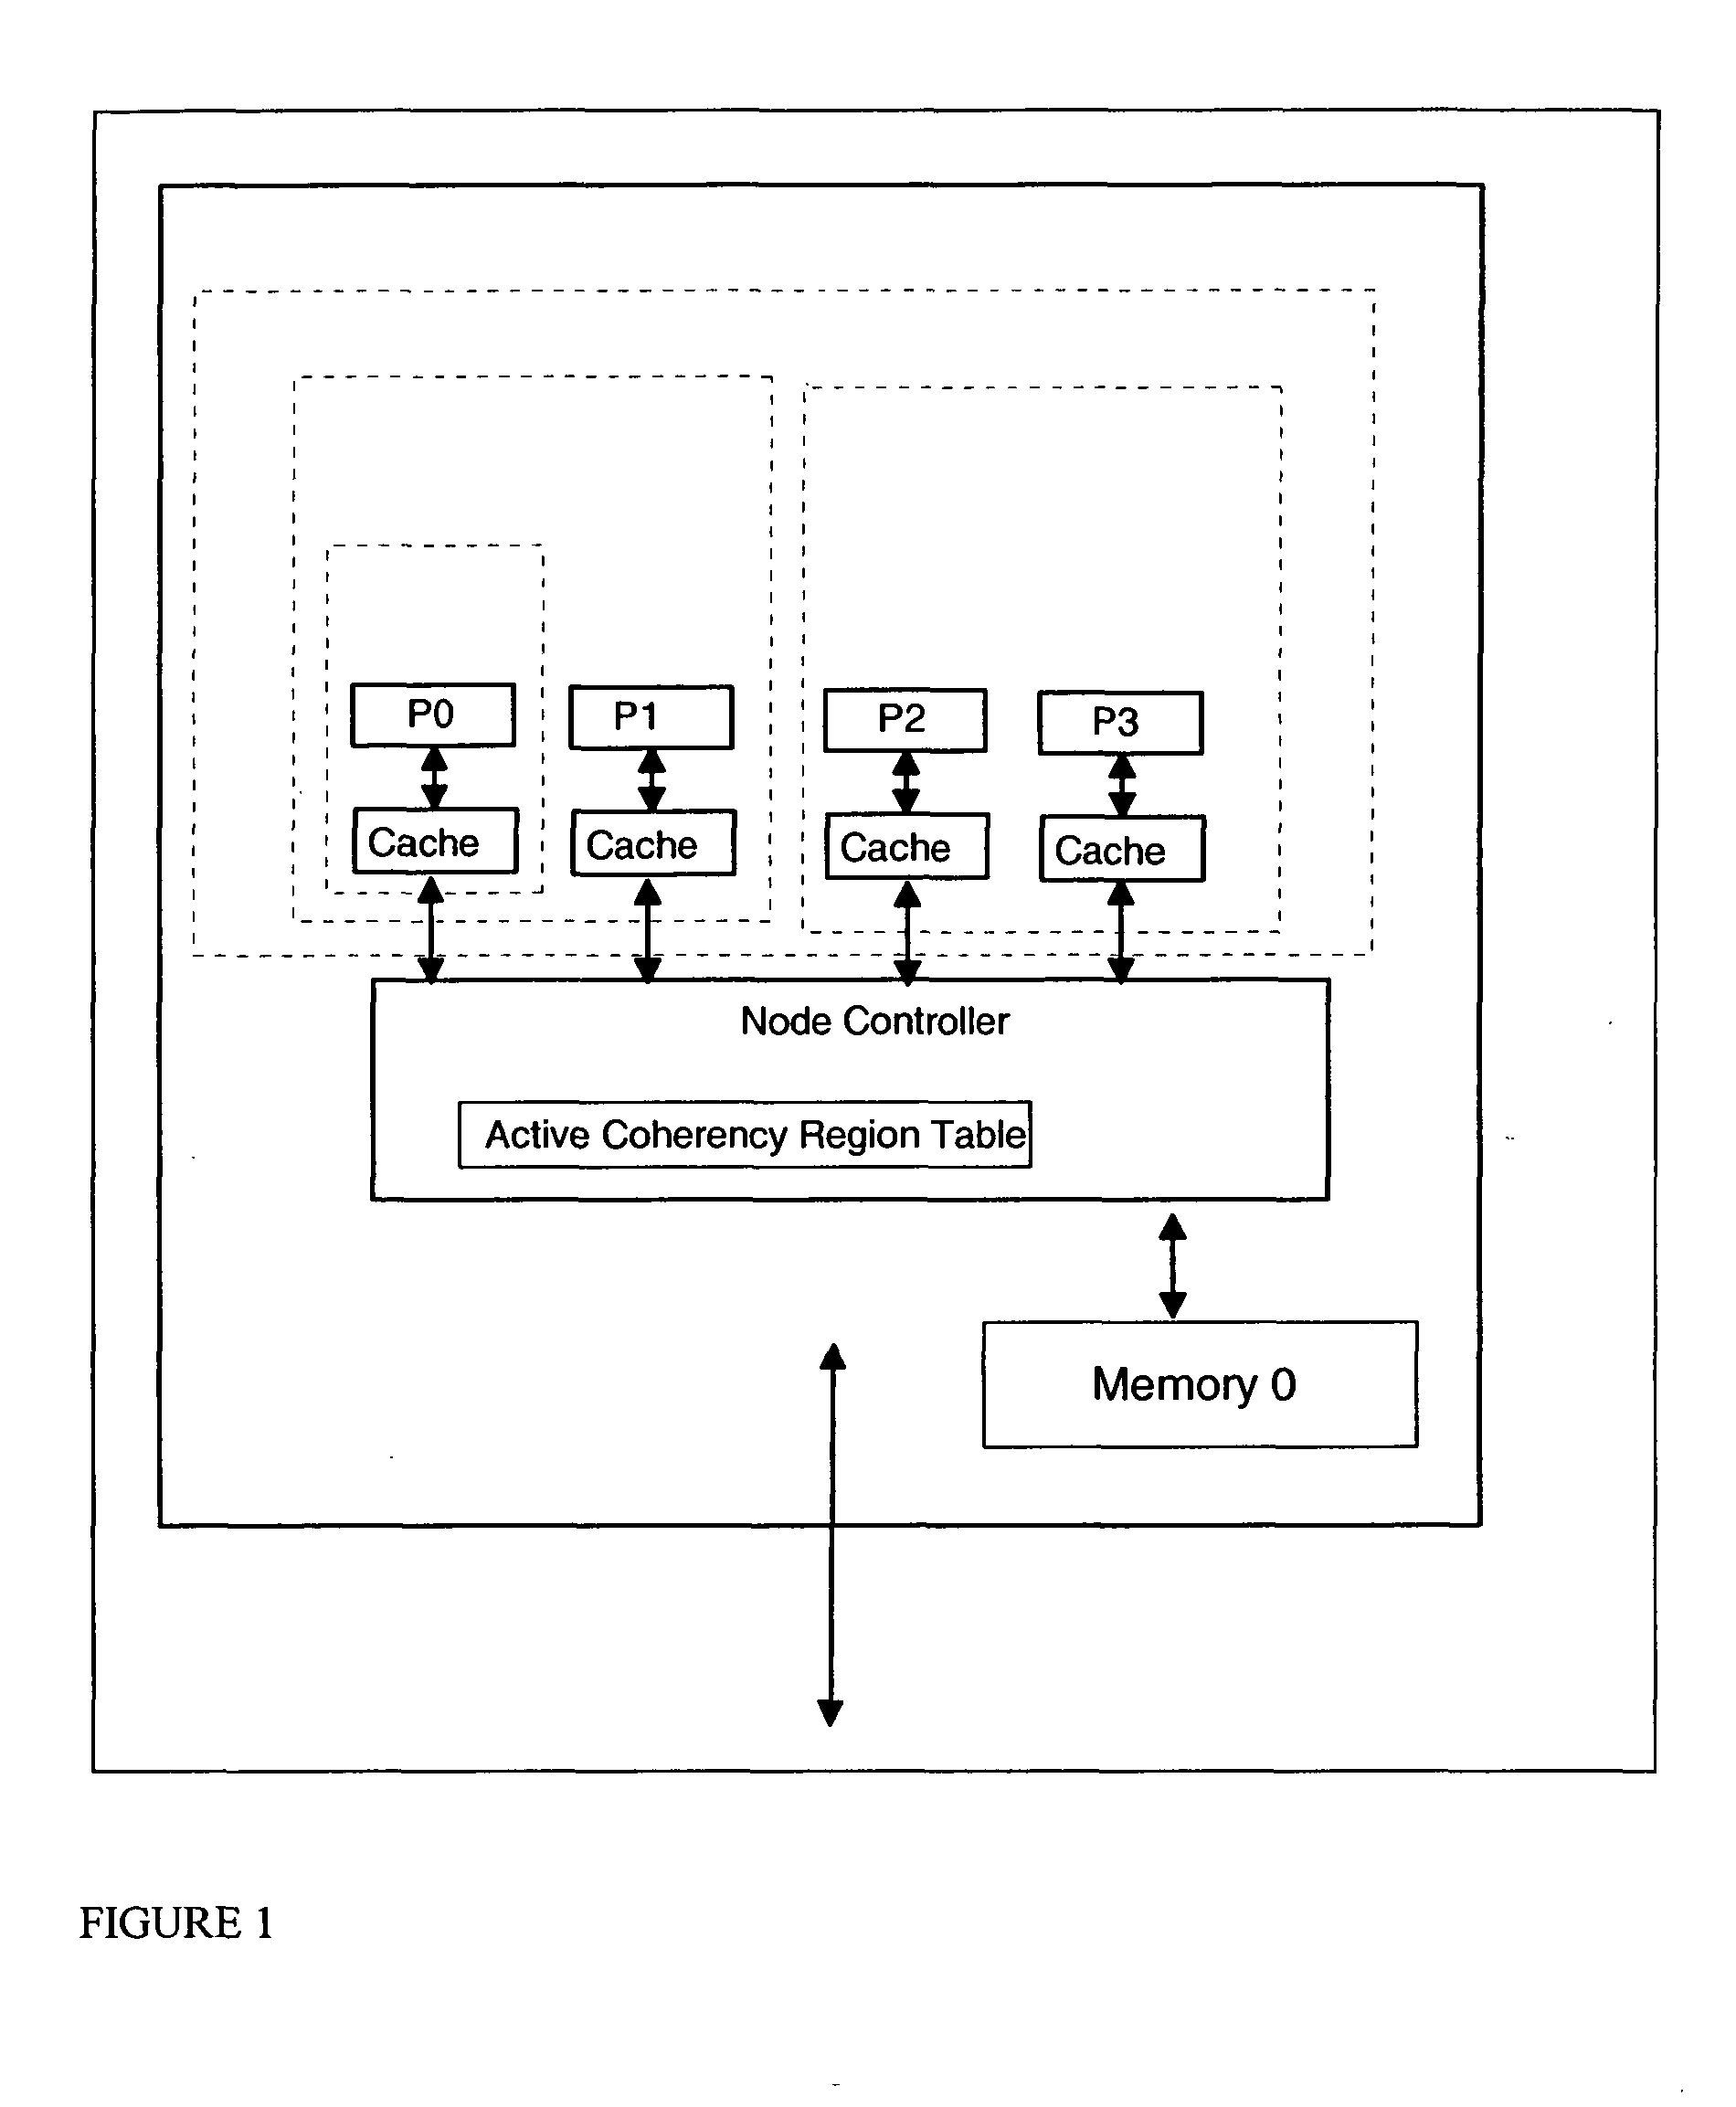 Multiprocessor computer system having multiple coherency regions and software process migration between coherency regions without cache purges